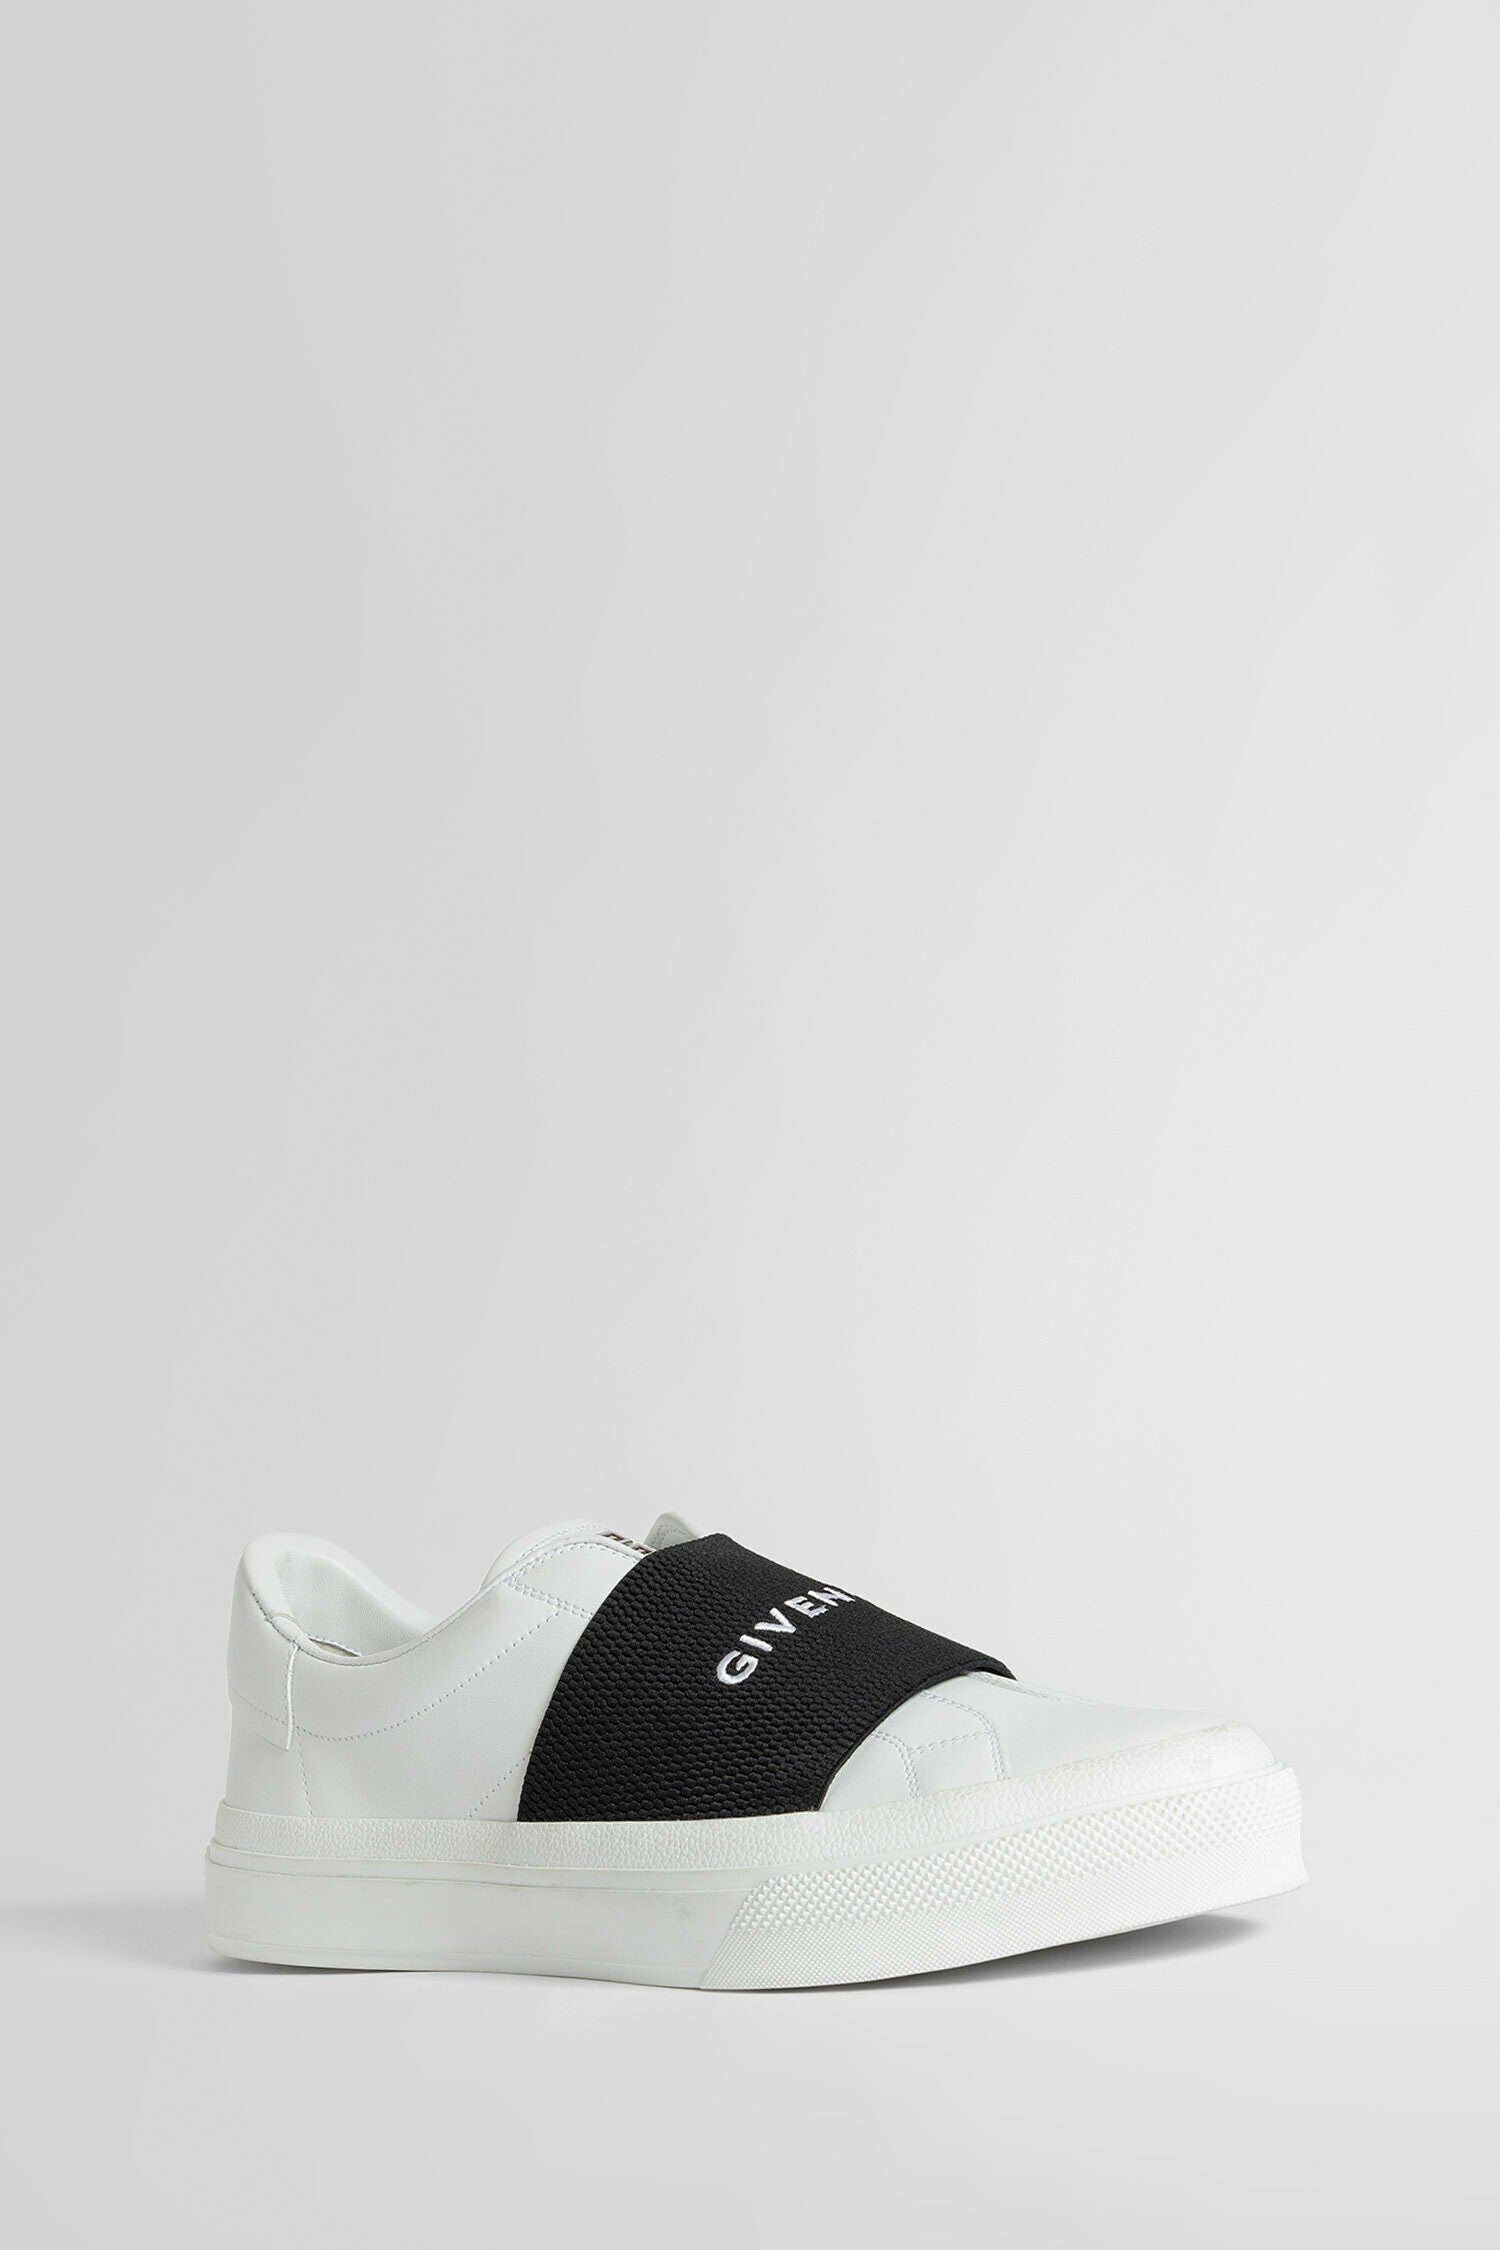 GIVENCHY MAN WHITE SNEAKERS - 2